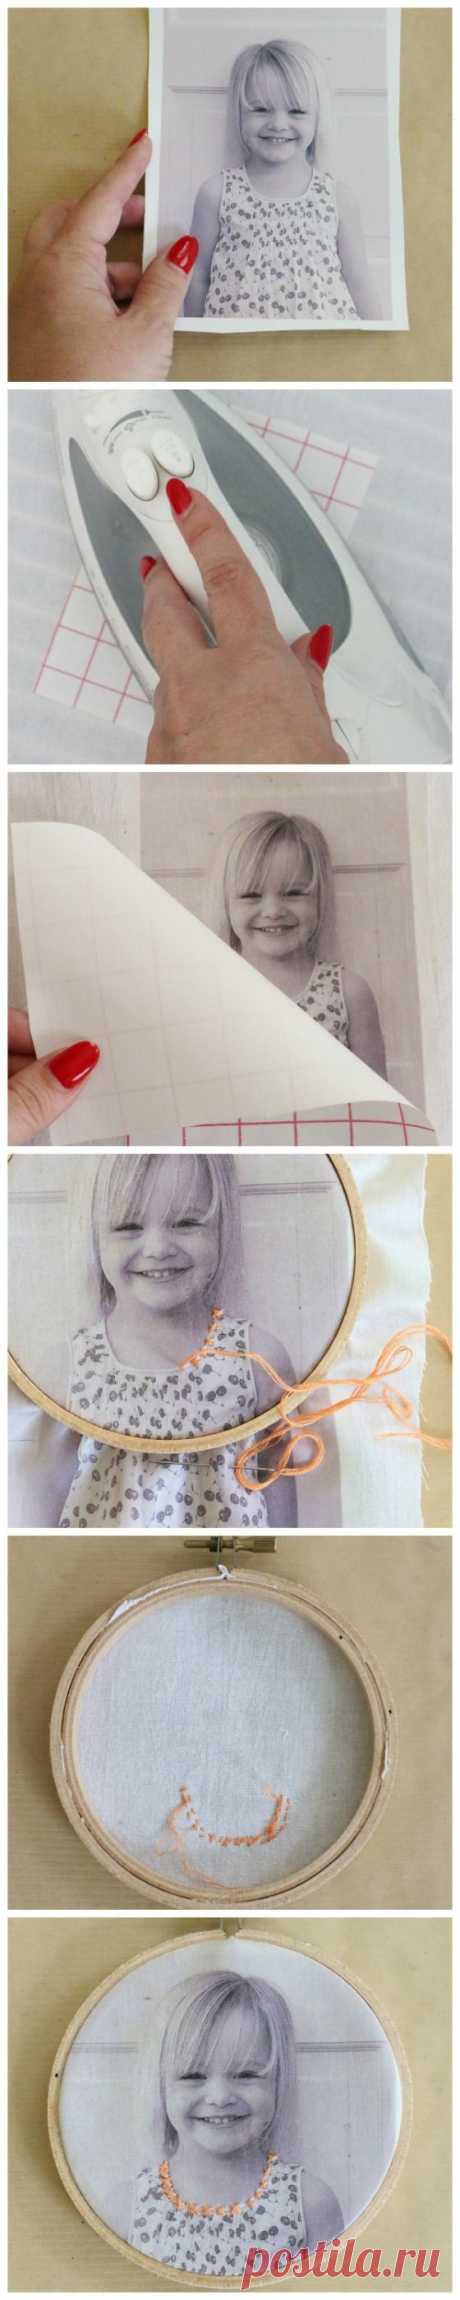 Embroidered Photo Family Portraits